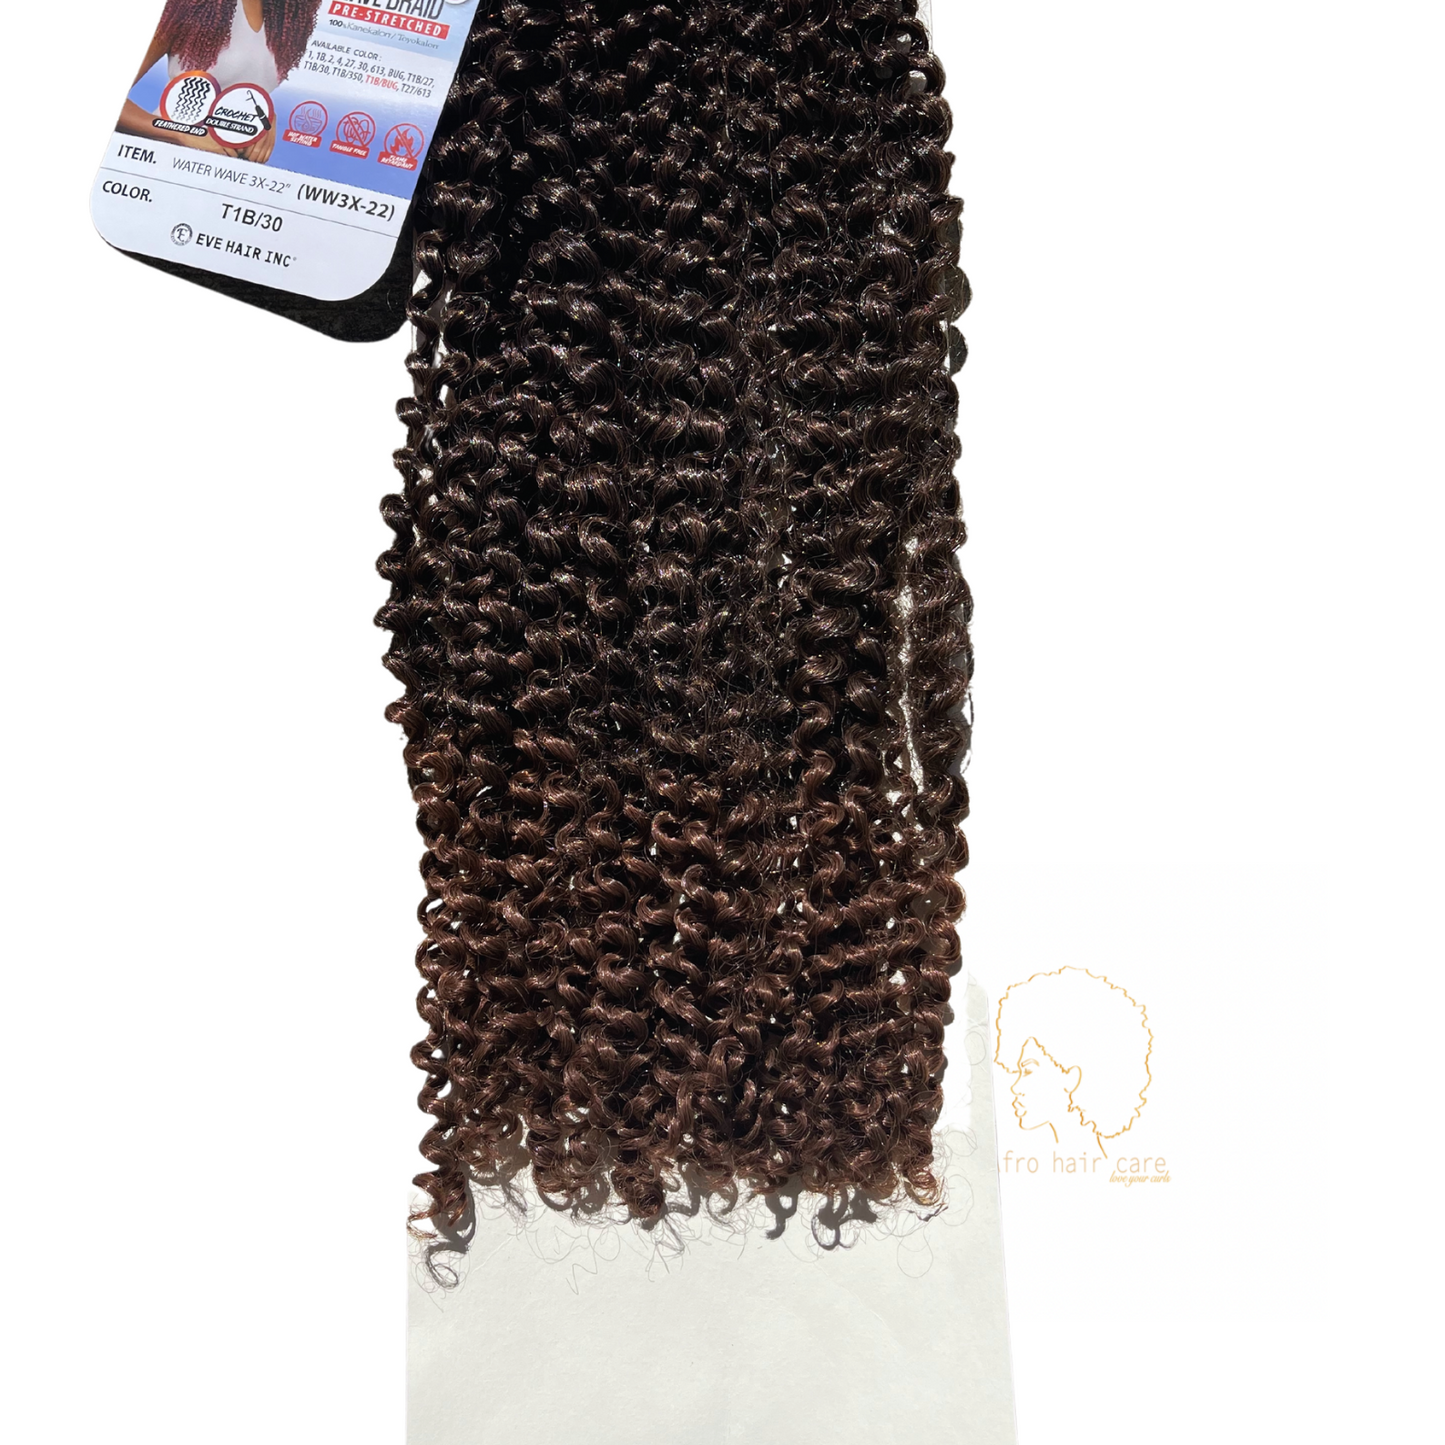 Pre-stretched Express Waterwave Crotchet hair x3